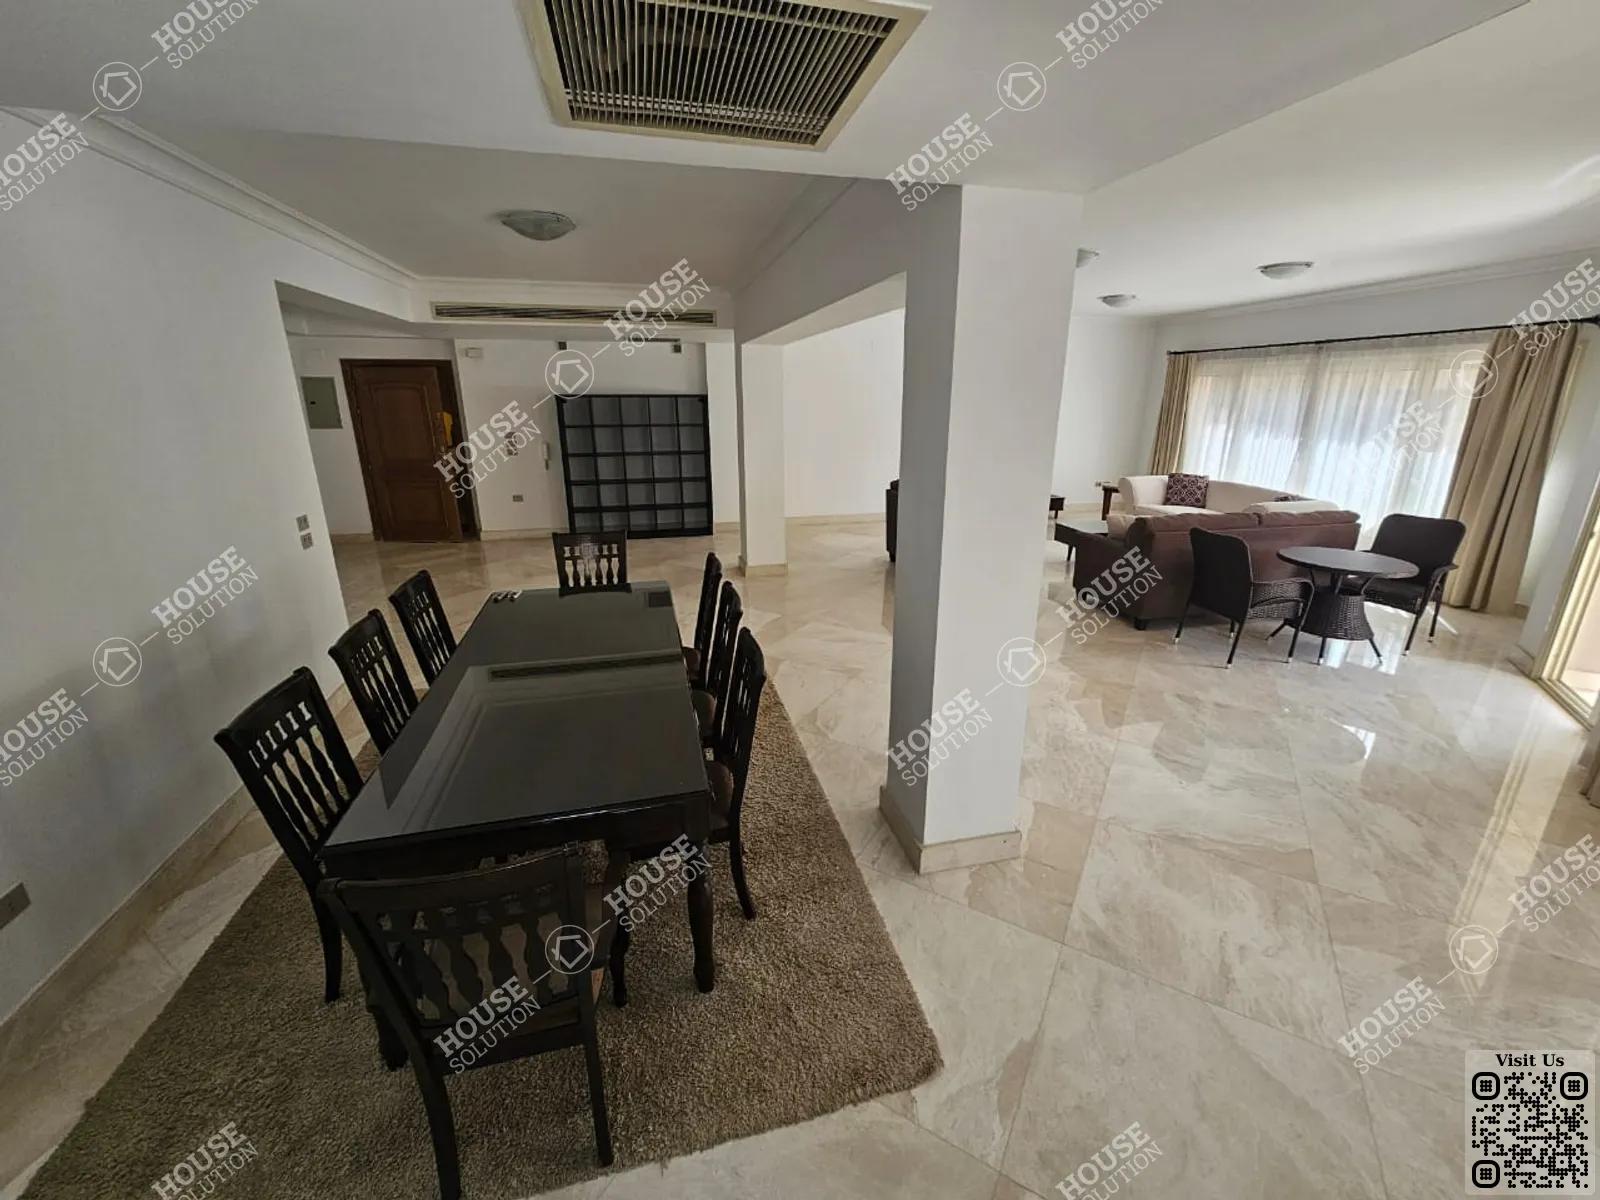 DINING AREA @ Apartments For Rent In Maadi Maadi Sarayat Area: 320 m² consists of 4 Bedrooms 4 Bathrooms Modern furnished 5 stars #5806-2